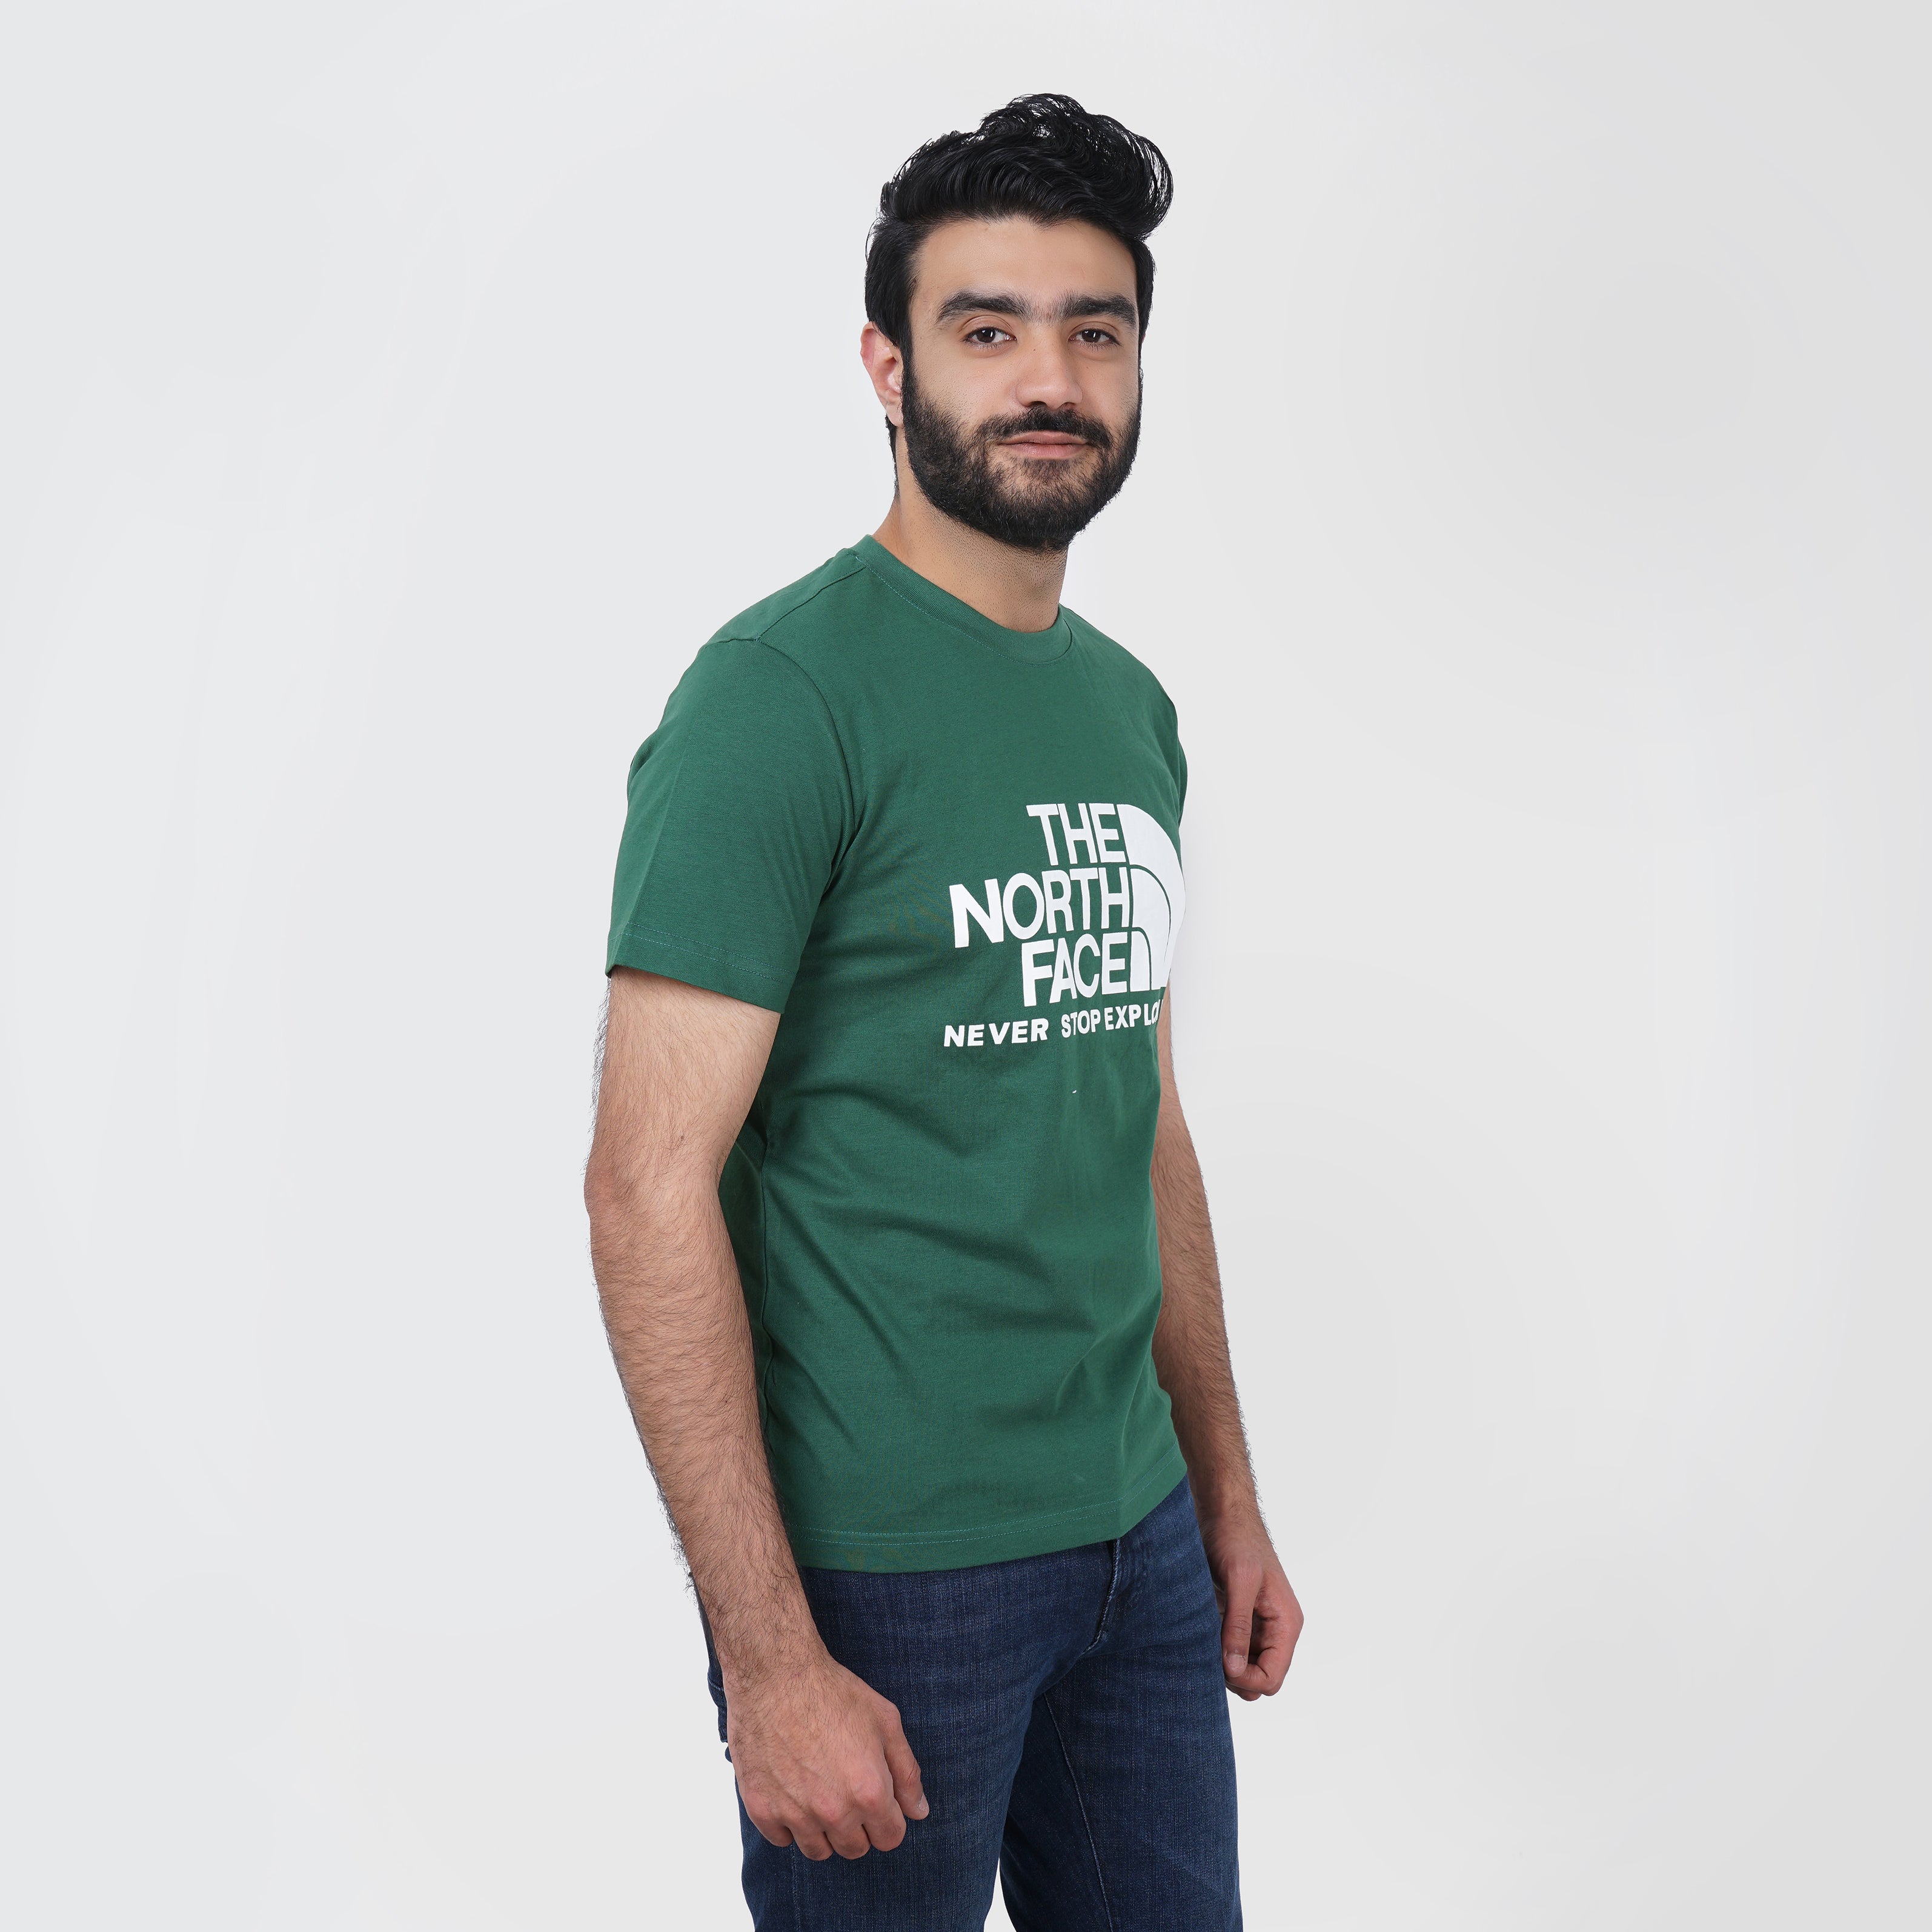 Man in green t-shirt with The North face logo, standing against a white background.